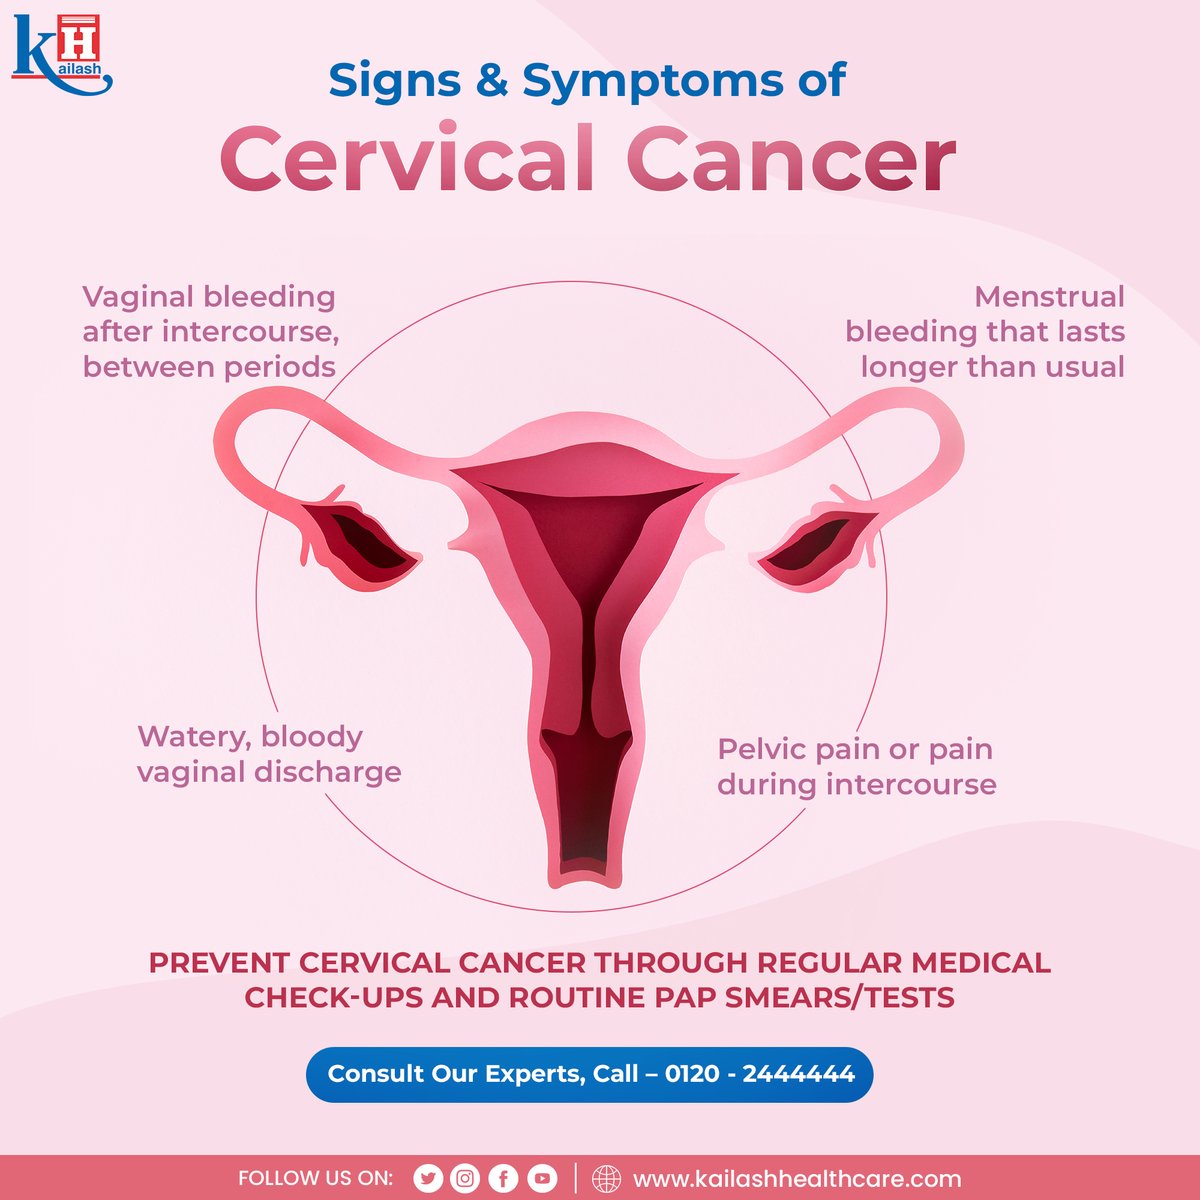 Early detection saves lives!

With early intervention and regular screenings, Cervical cancer can be prevented effectively.

Consult our Obst & Gynaecologists: kailashhealthcare.com

#CervicalCancerAwareness #EarlyDetectionSavesLives #cancerdiagnosis #cancerprevention